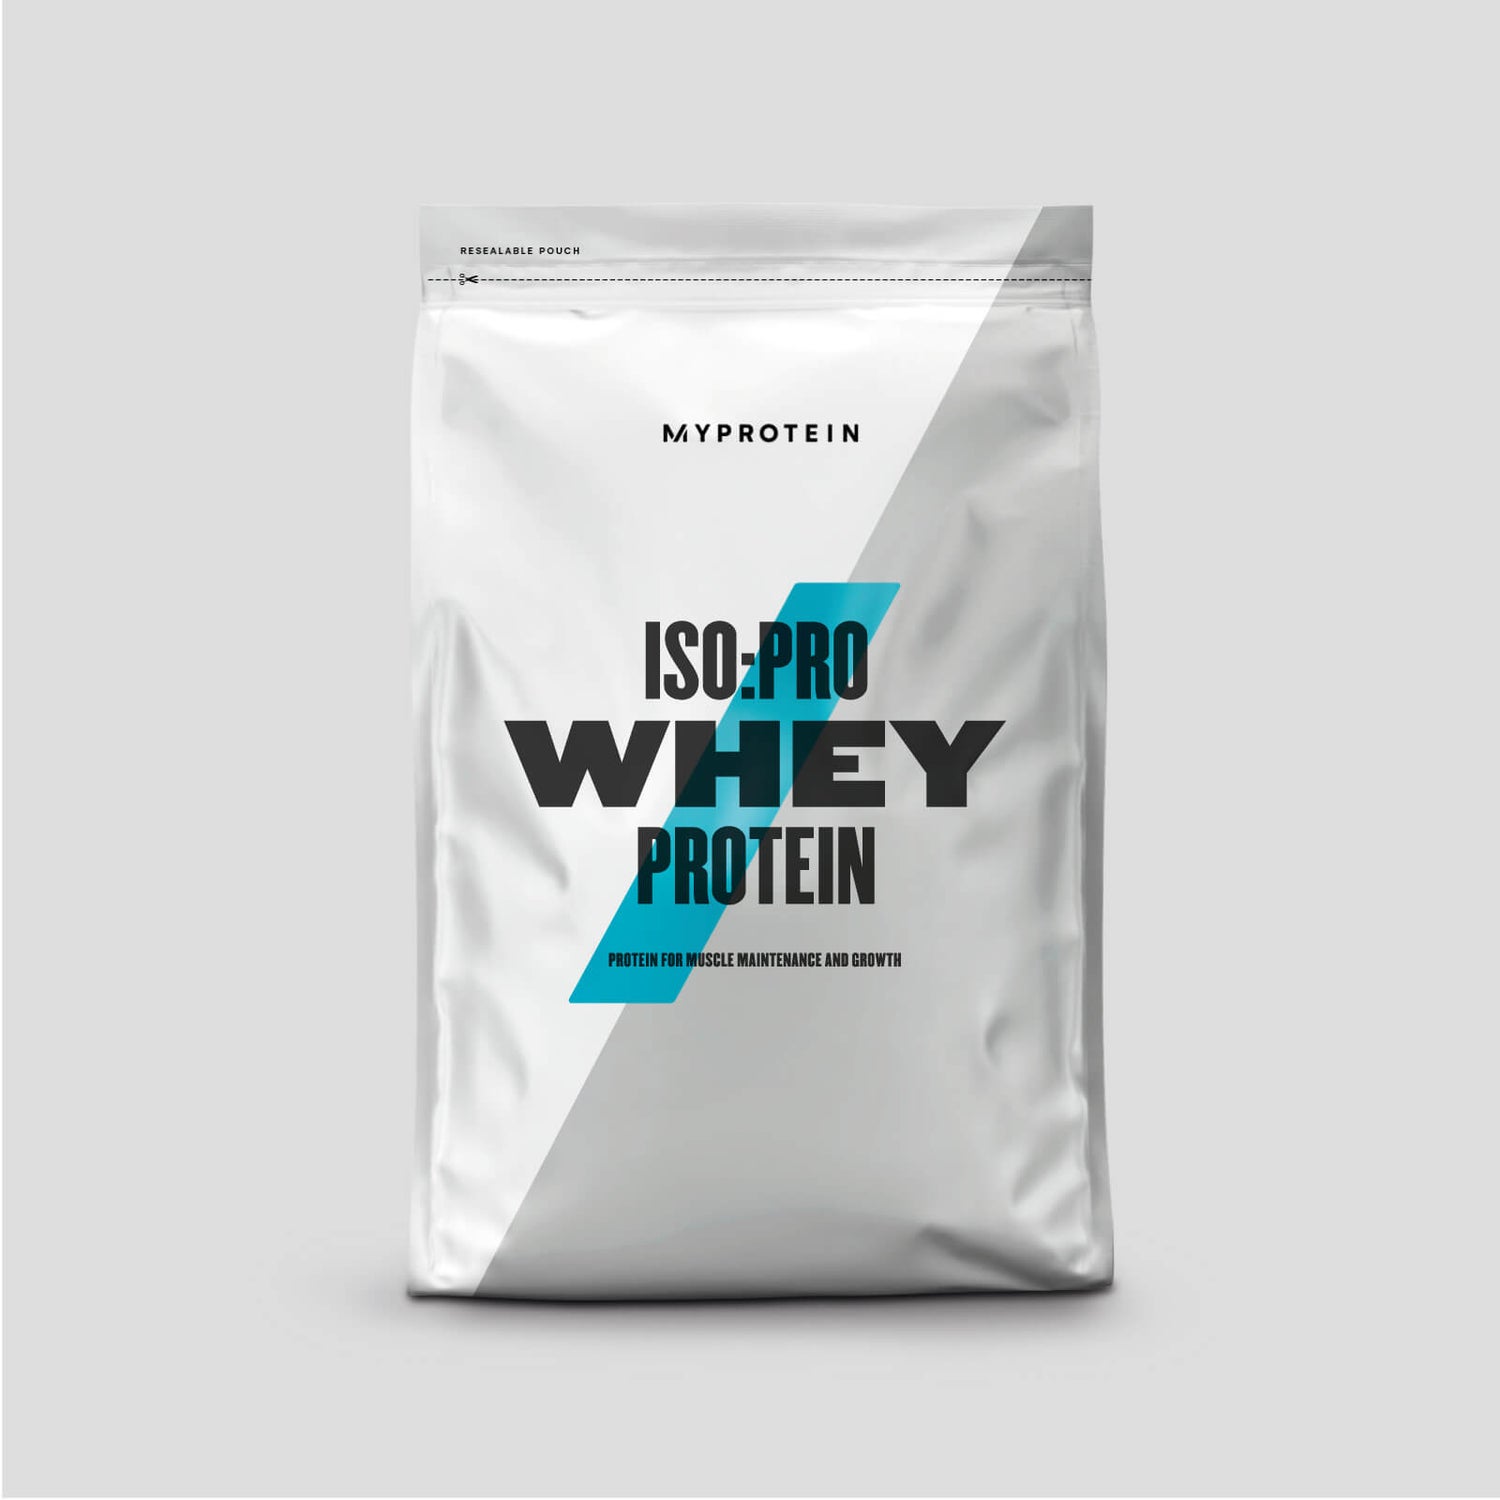 Iso:Pro Whey Protein - 1kg - Strawberry